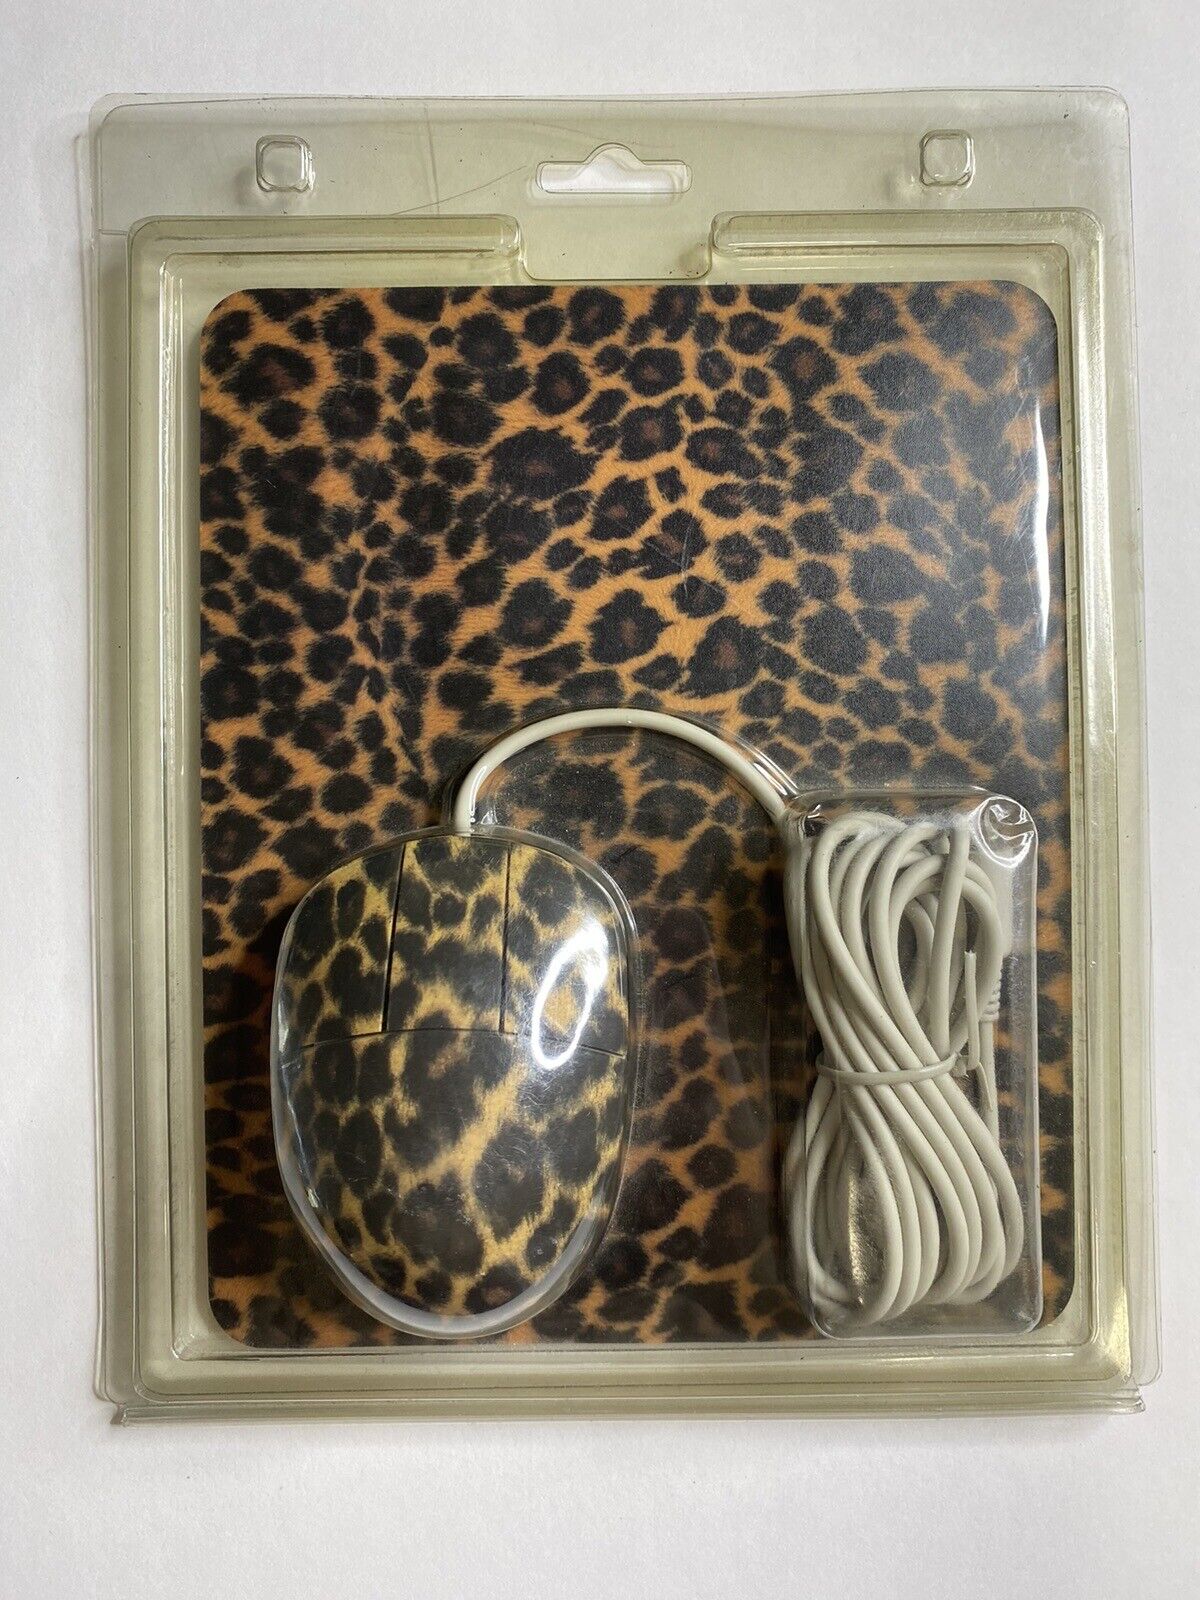 Vintage Cheetah Animal Print Computer Mouse with Pad L-1201 - NEW